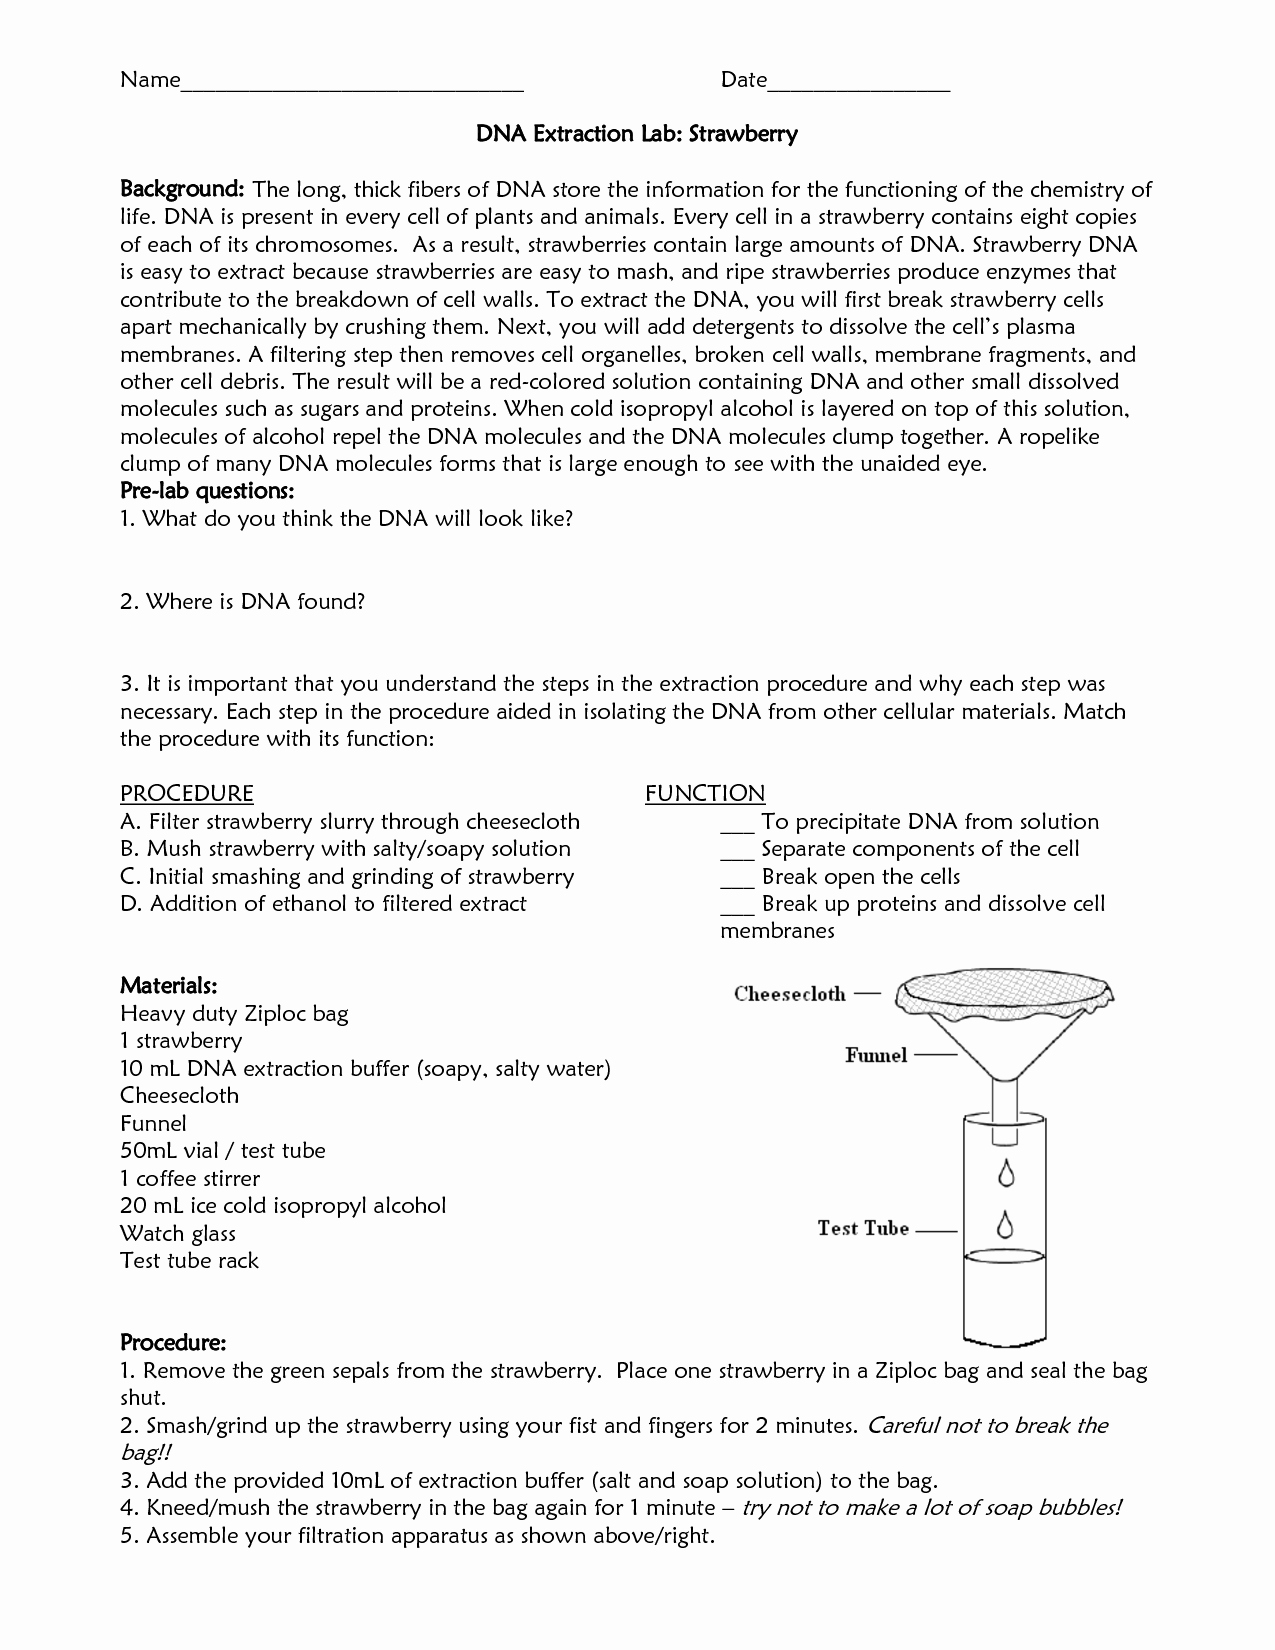 Strawberry Dna Extraction Lab Worksheet Unique 15 Best Of Dna Extraction Worksheet Dna